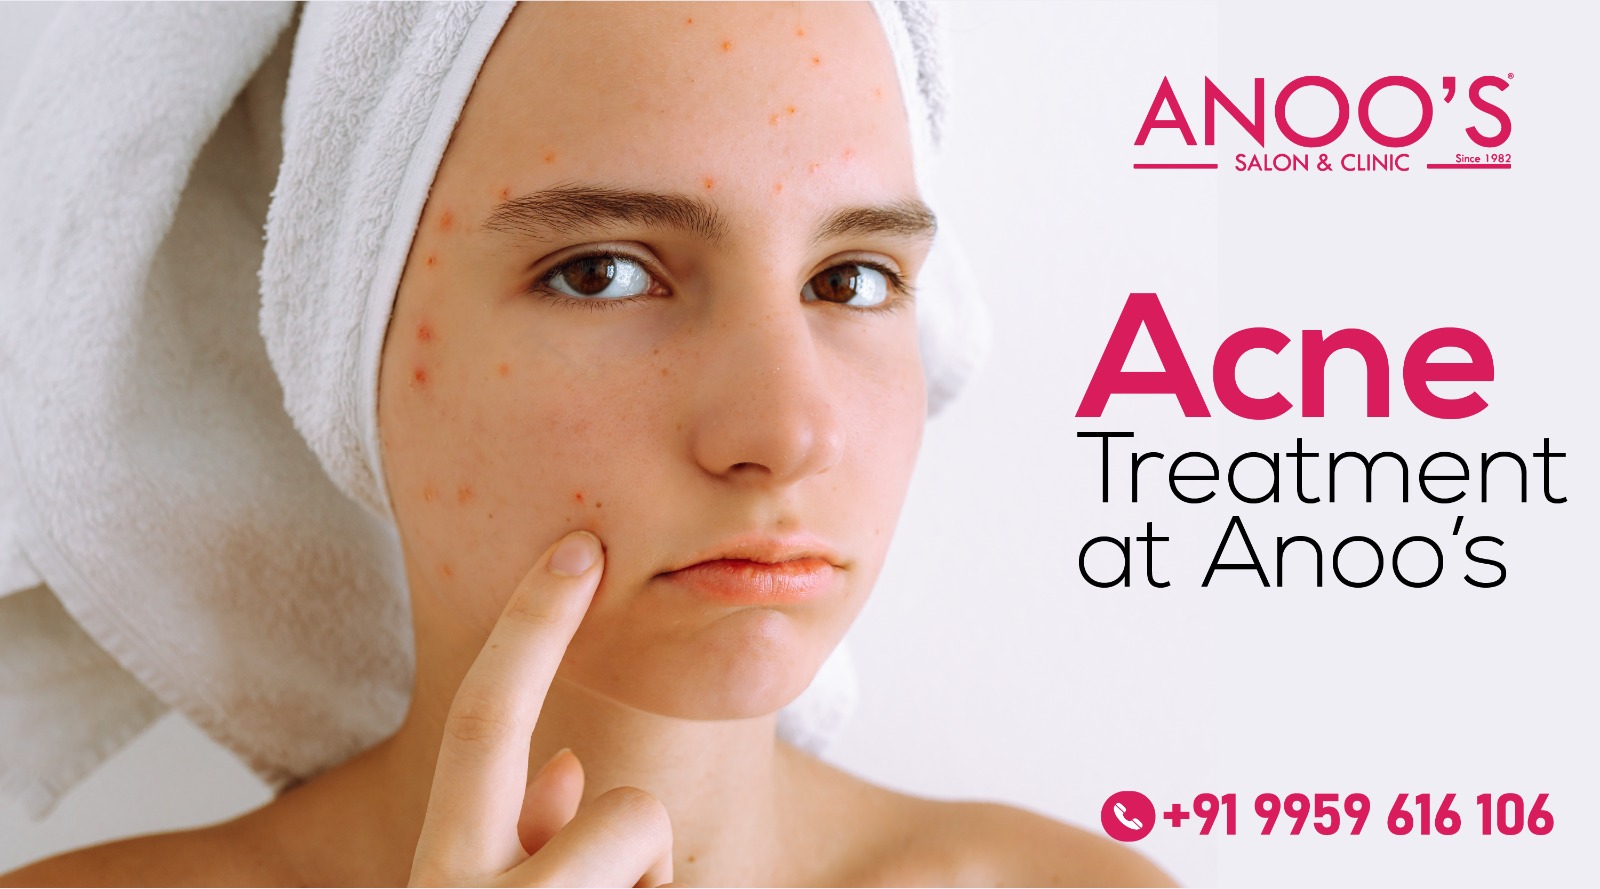 Say Goodbye to Acne Scars with Anoos Advanced Acne Removal Treatment | Anoos